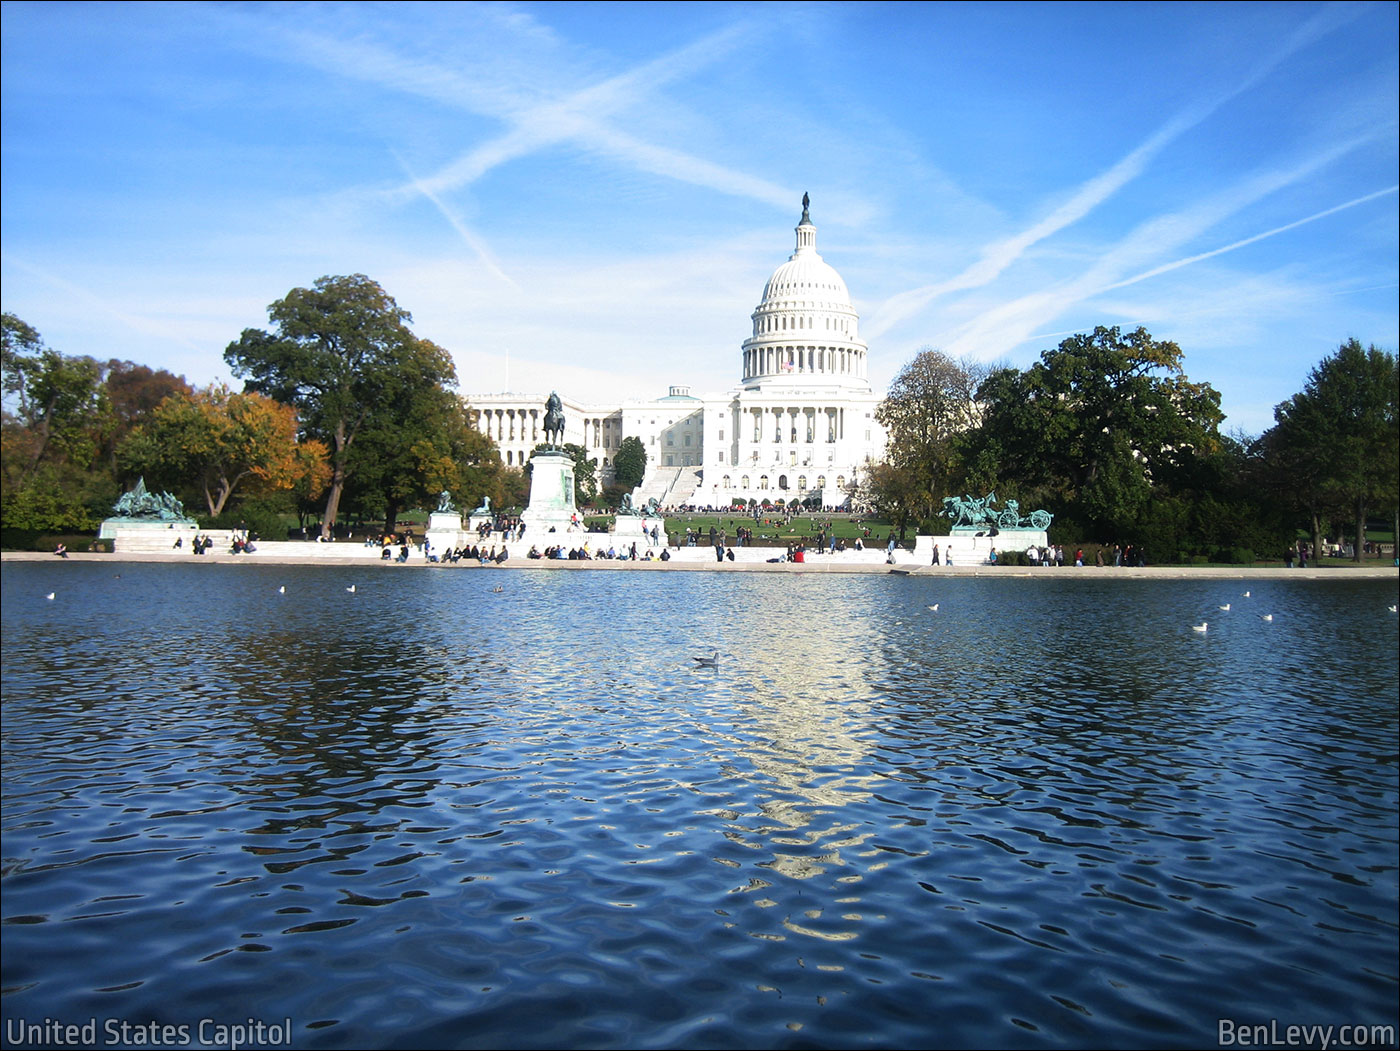 Capitol Reflecting Pool at the United States Capitol Building